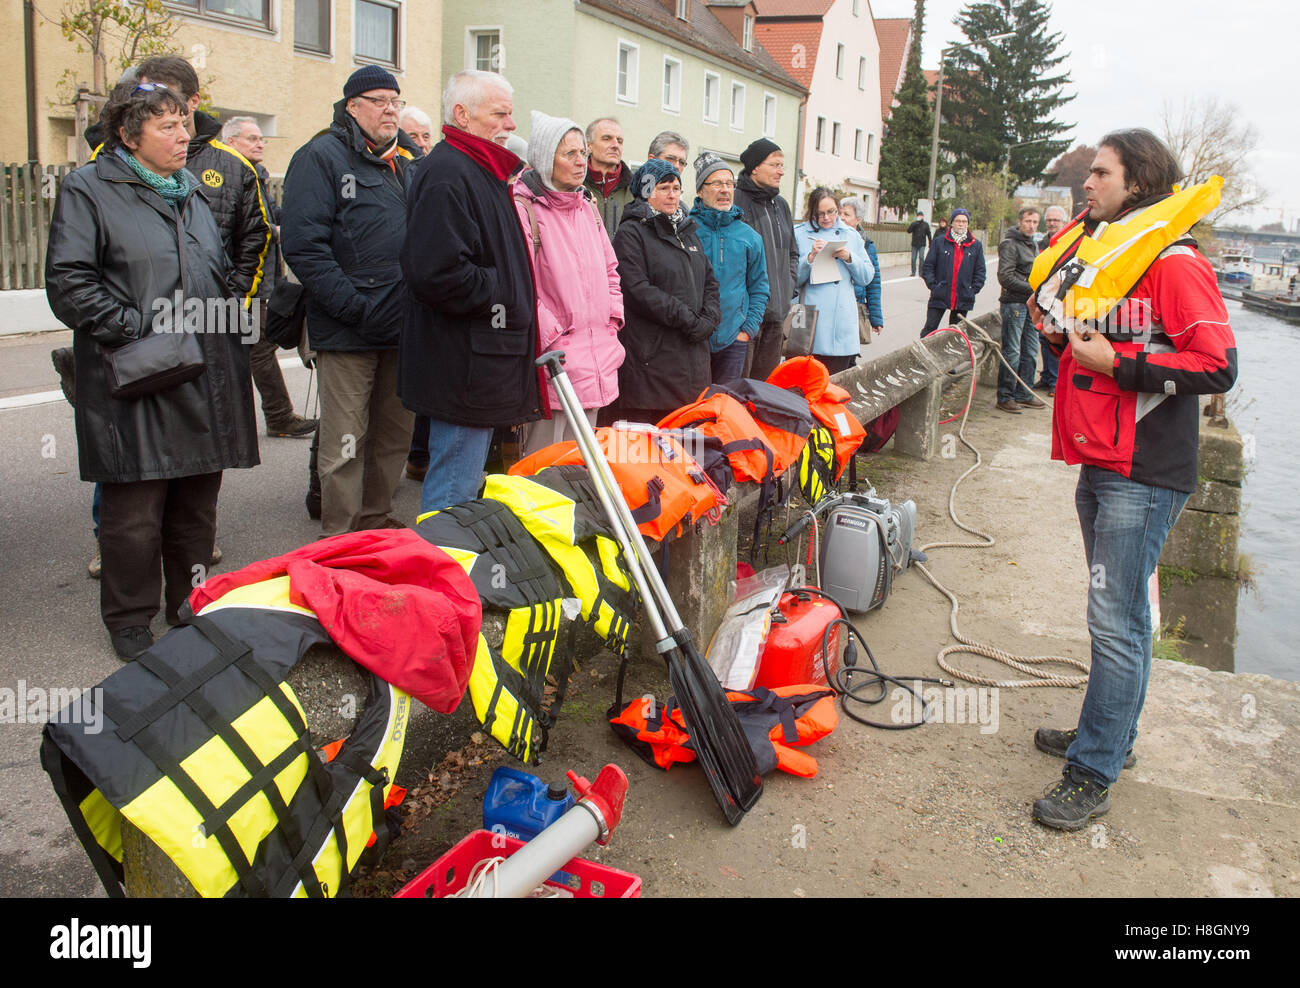 Regensburg, Germany. 12th Nov, 2016. The initatior of the refugee initiative 'Sea Eye, ' Michael Buschheuer (R), explains how to use a life vest during a rescue drill on the Danube river in Regensburg, Germany, 12 November 2016. The organization reports that the German rescue ship 'Sea-Eye' saved more than 5,500 refugees from the Mediterranean Sea this year. Photo: ARMIN WEIGEL/dpa/Alamy Live News Stock Photo